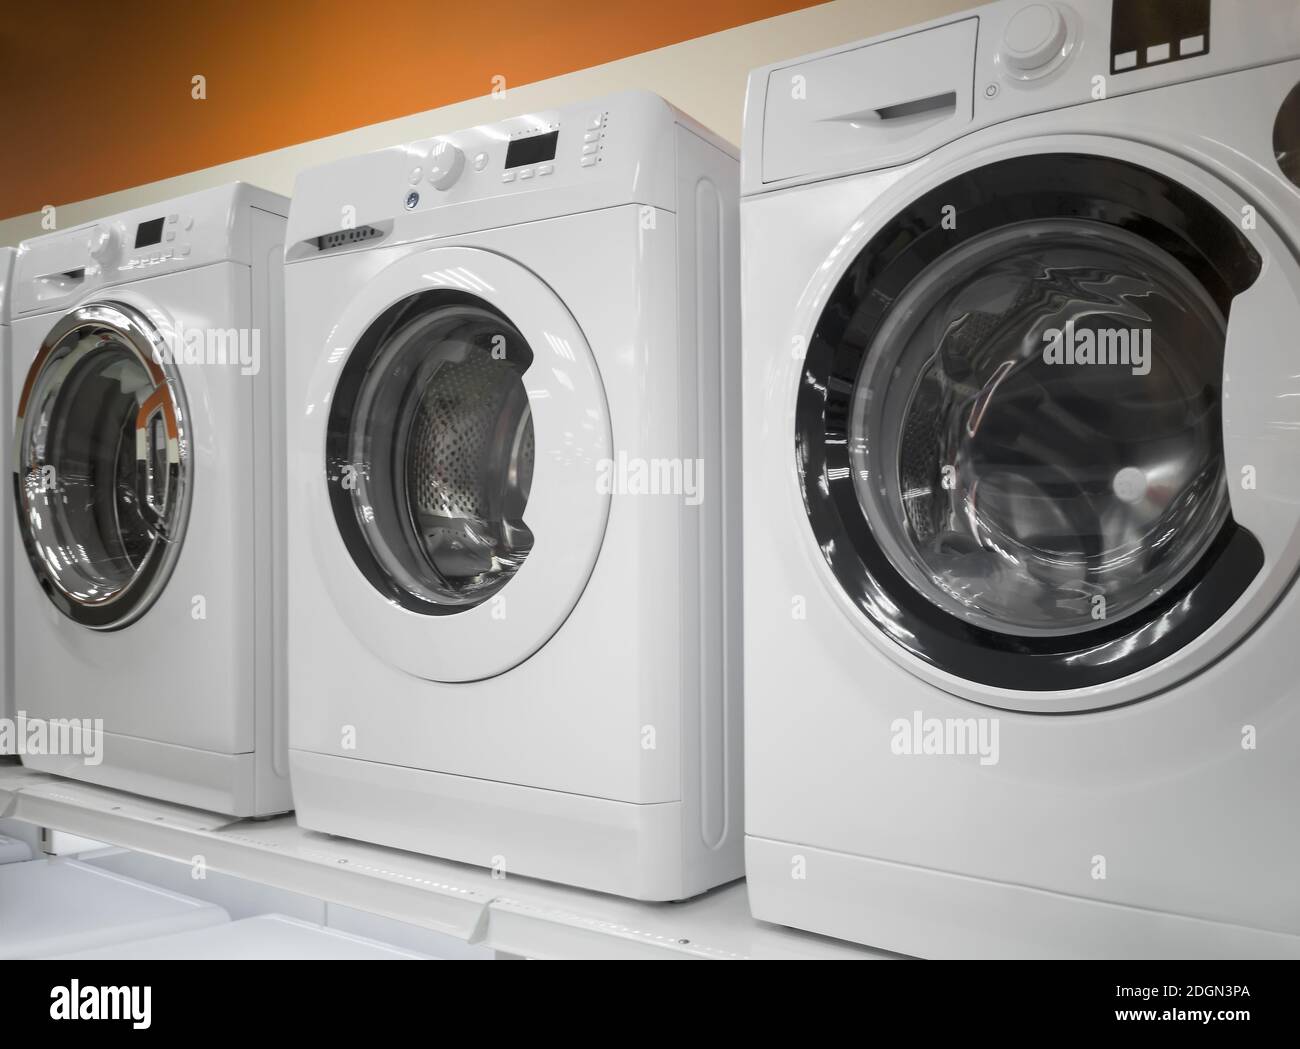 Washing machines are sold in the store. Stock Photo